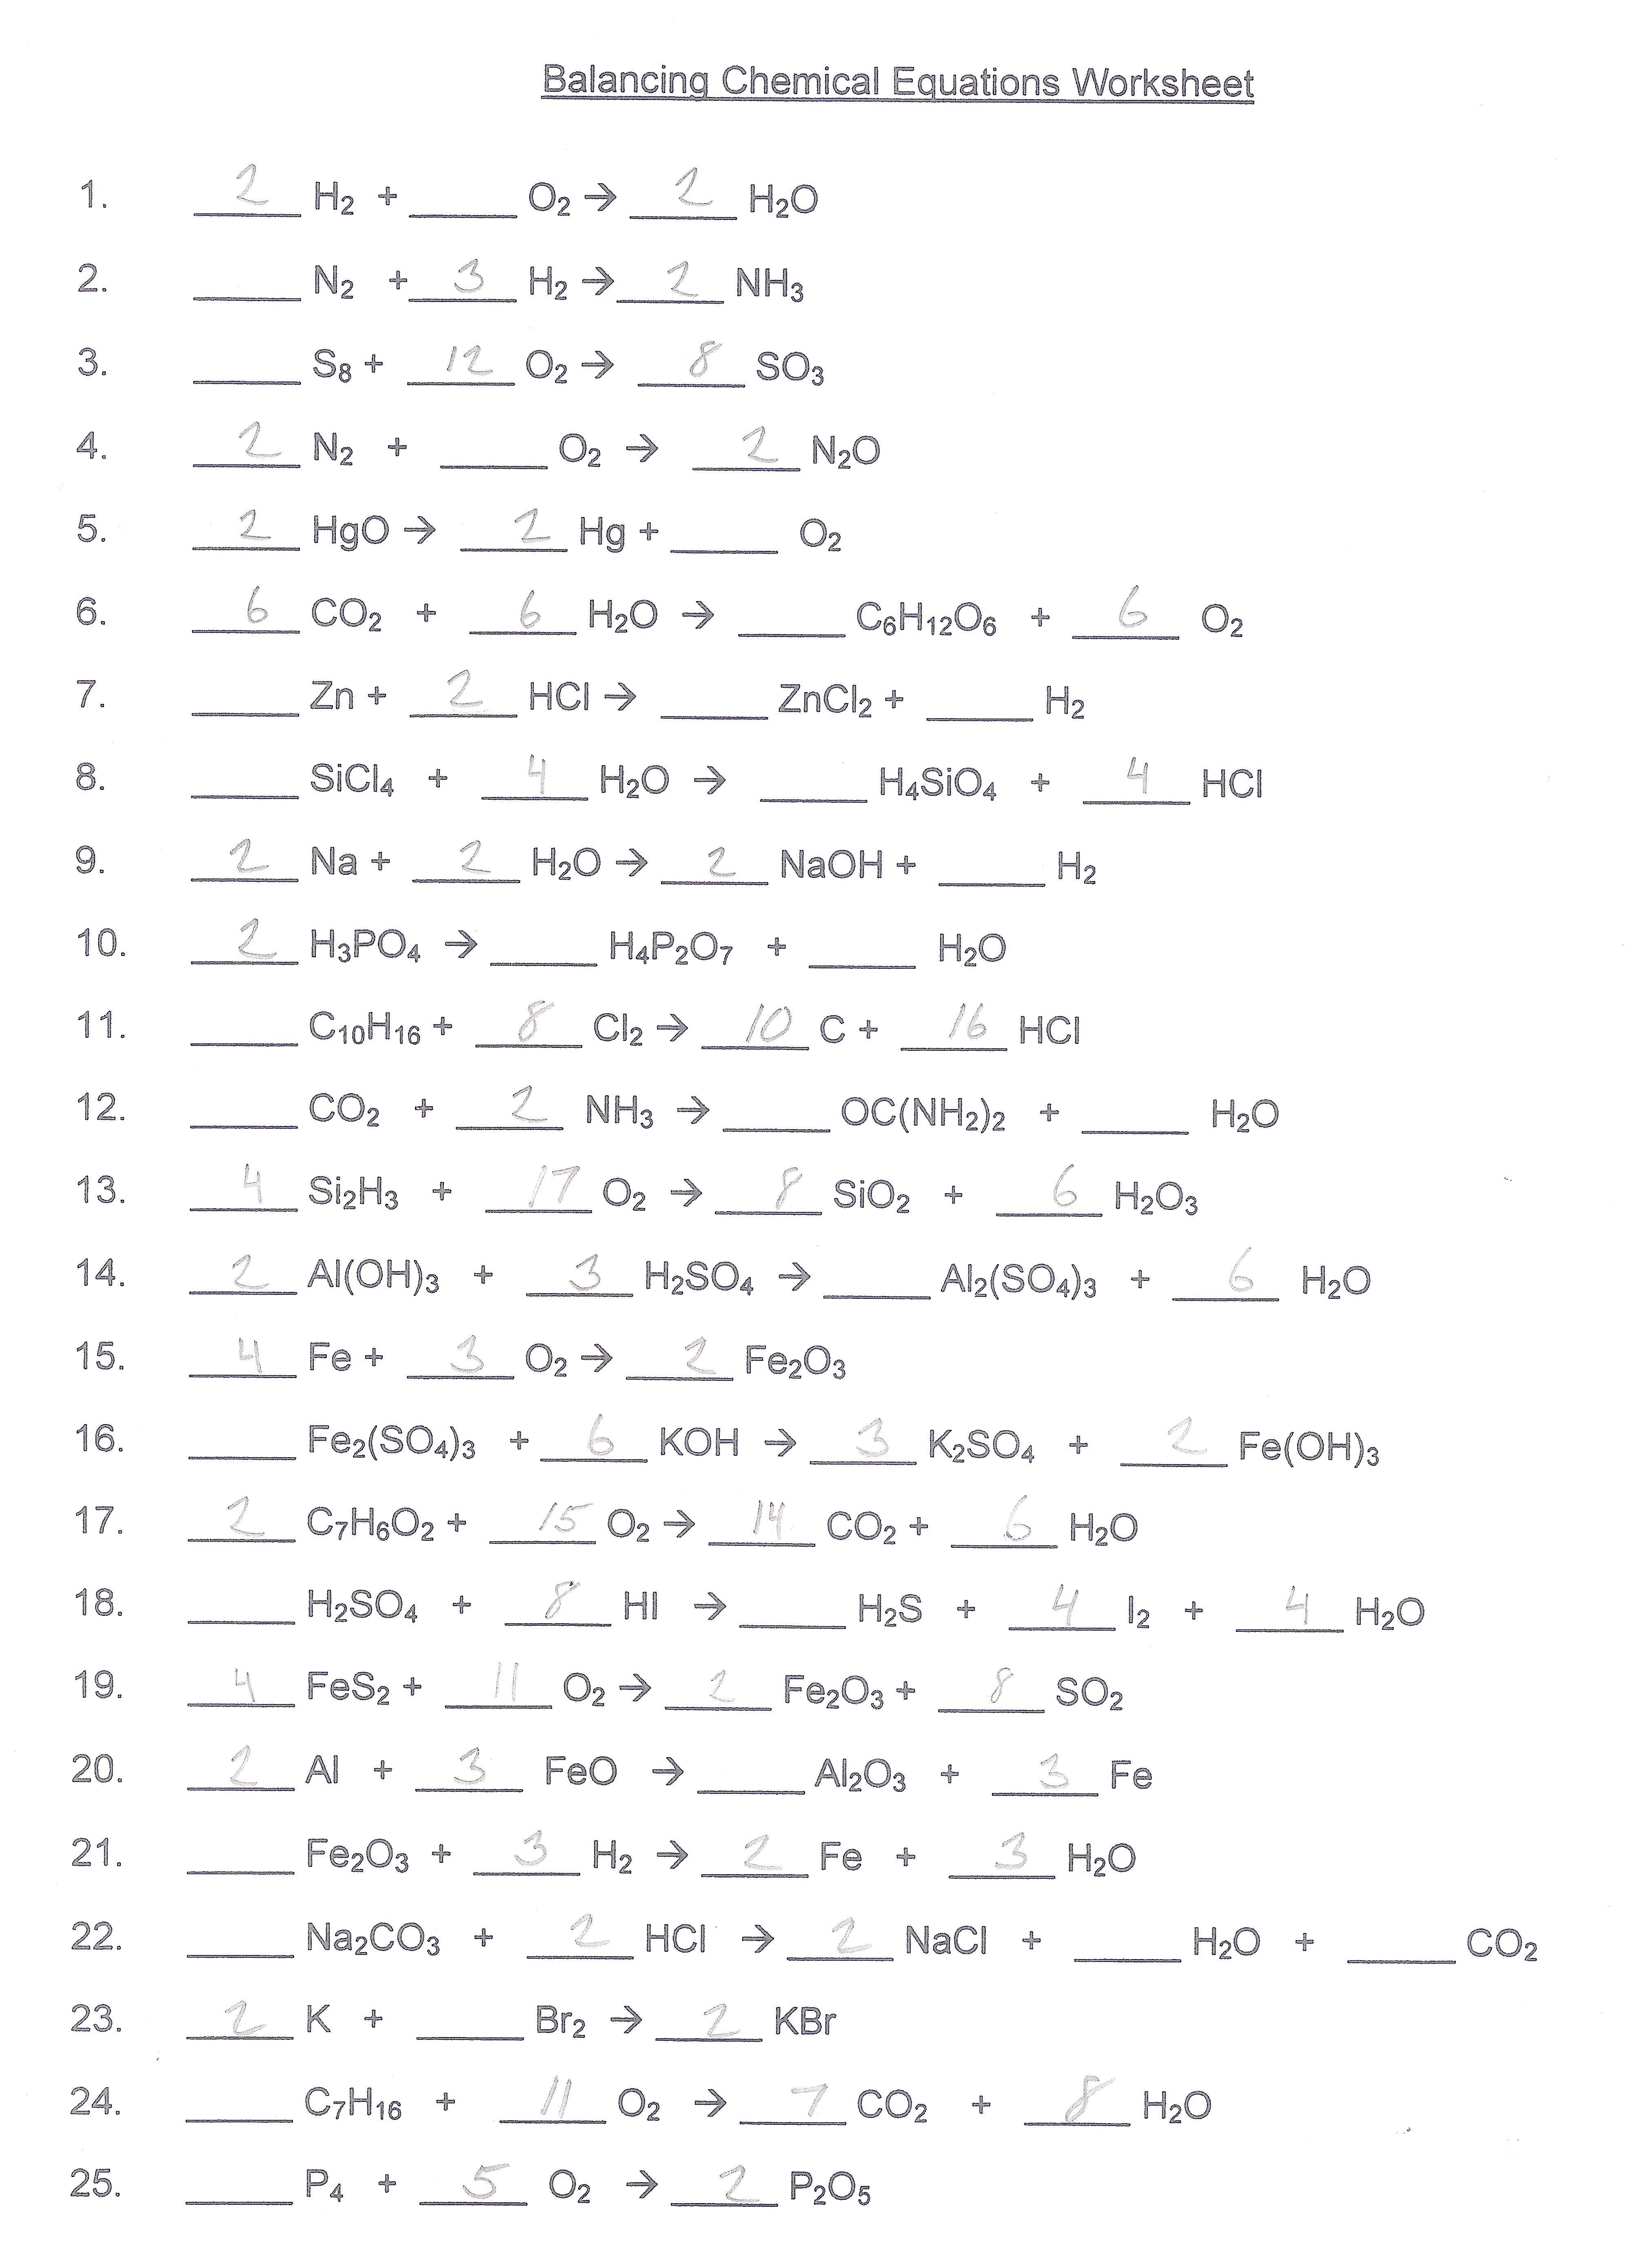 Chemistry Chemical Reactions Study Guide Key - skieywee For Chemical Reactions Worksheet Answers